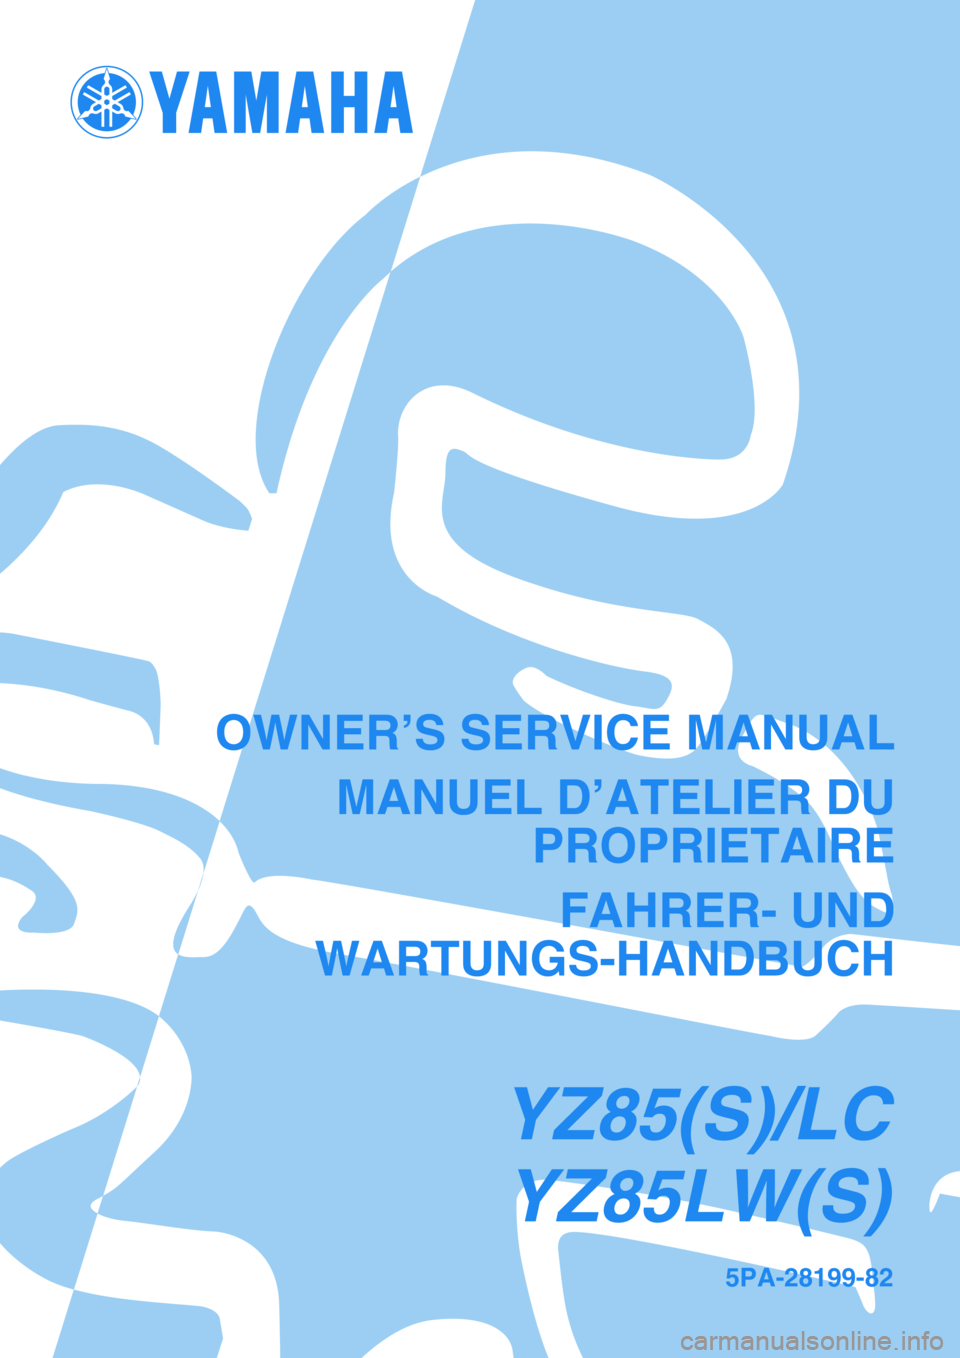 YAMAHA YZ85 2004  Owners Manual 5PA-28199-82
OWNER’S SERVICE MANUAL
MANUEL D’ATELIER DU
PROPRIETAIRE
FAHRER- UND
WARTUNGS-HANDBUCH
YZ85(S)/LC
YZ85LW(S) 